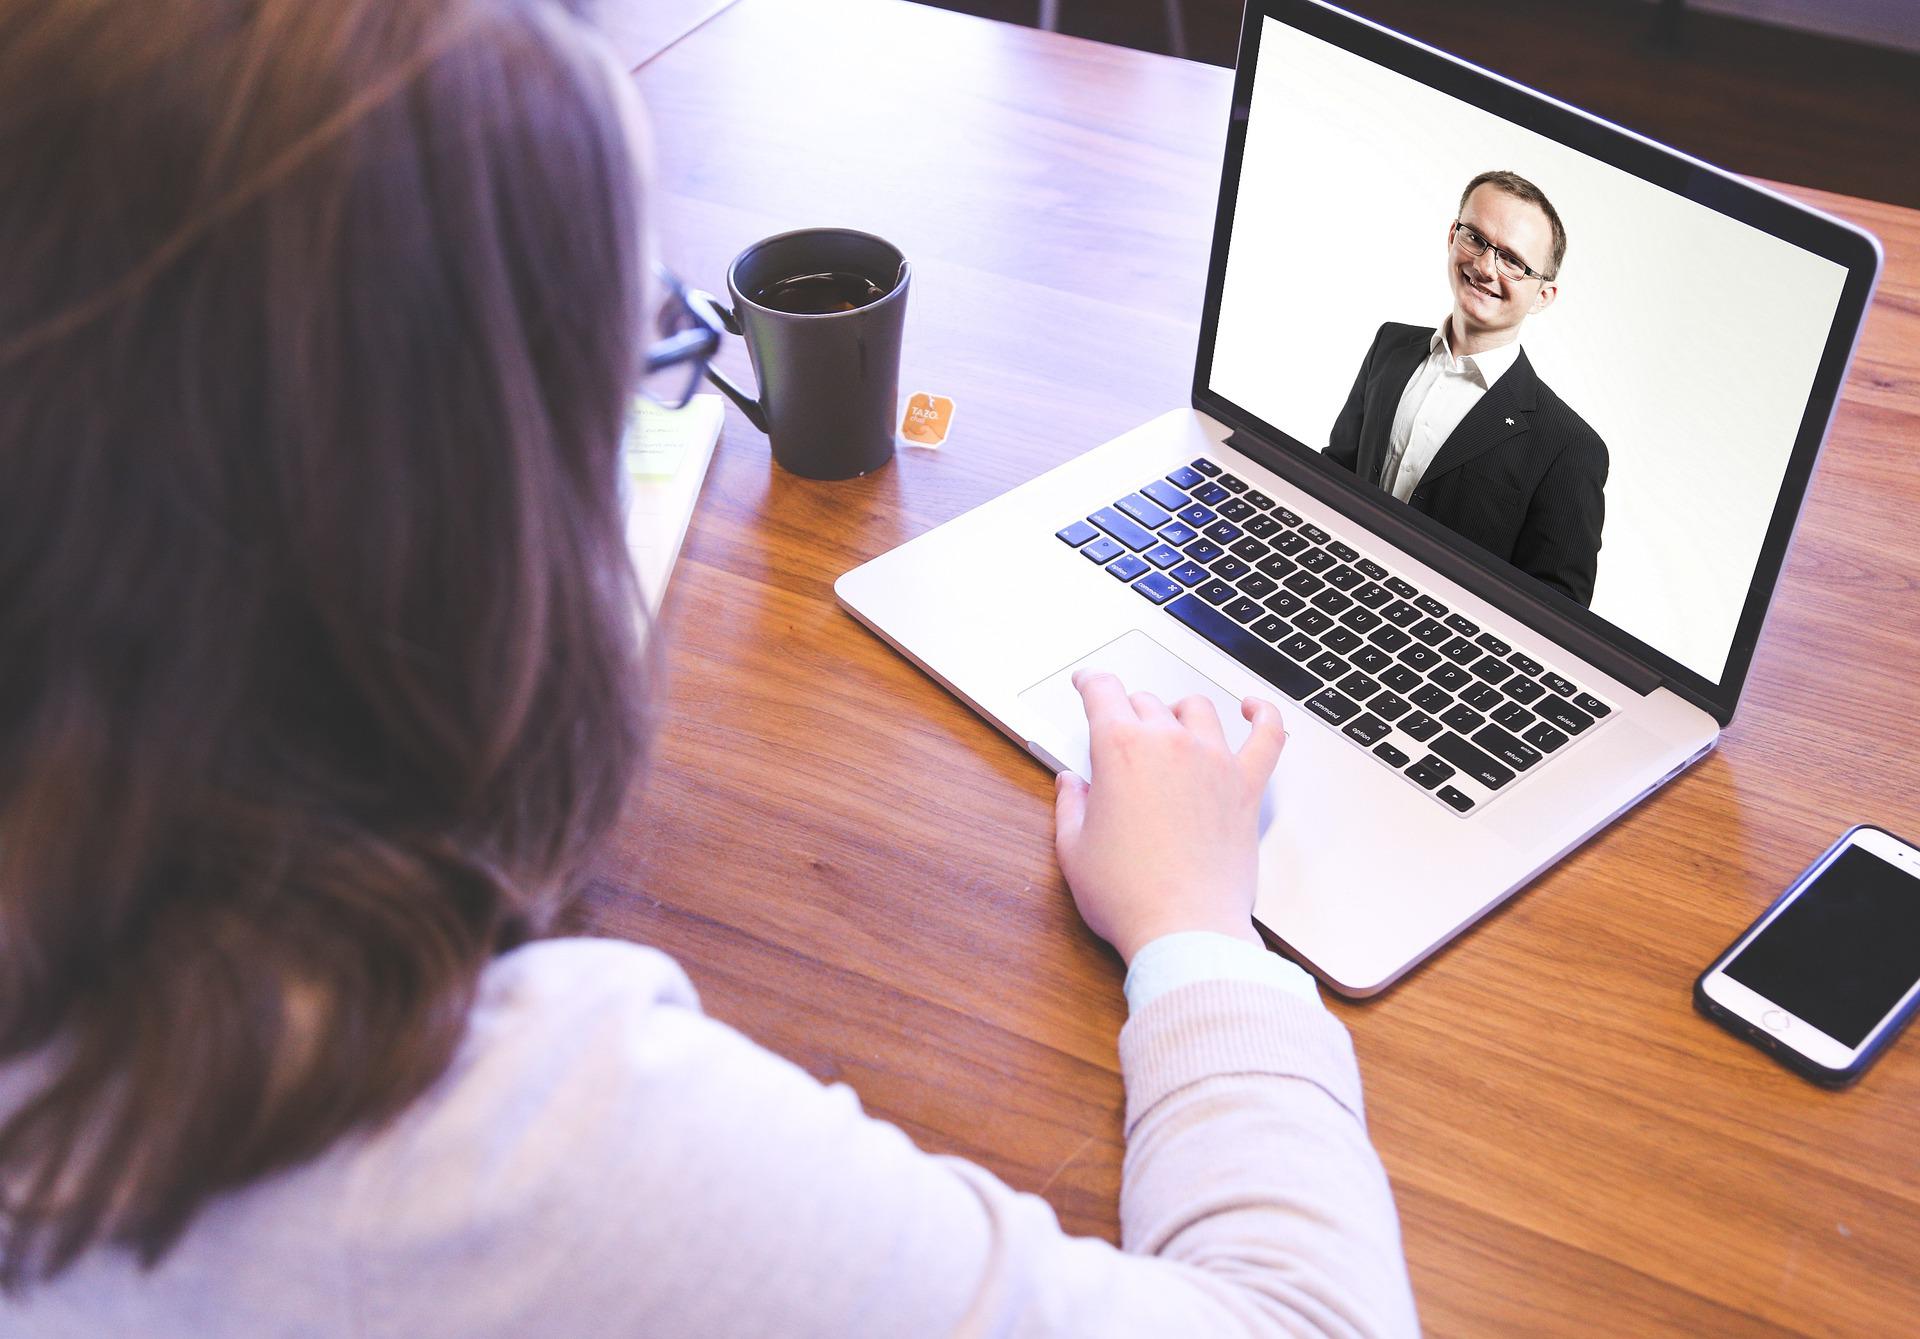 Virtual Interviews and How to Prepare